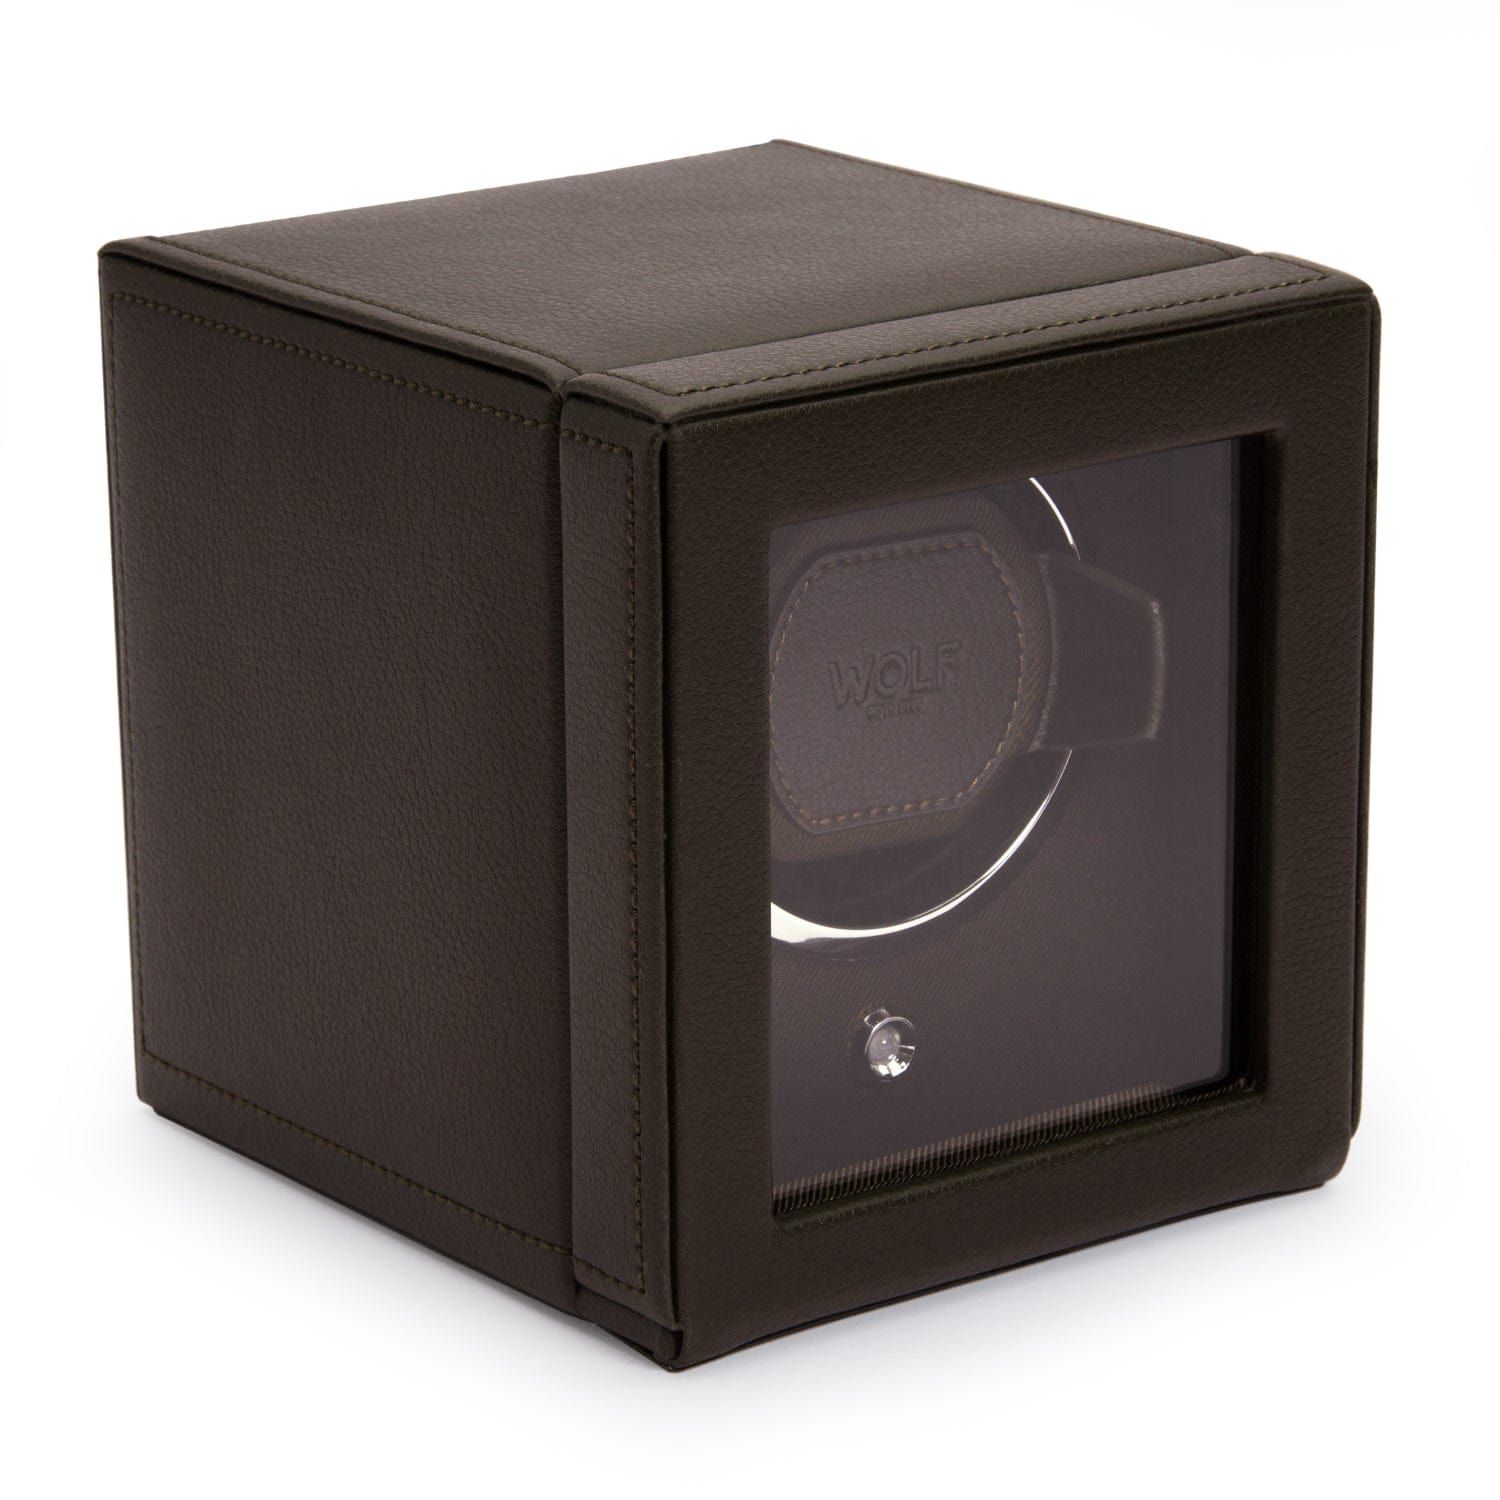 Wolf1834 Watch Winder Cub Single Watch Winder with Cover-Brown